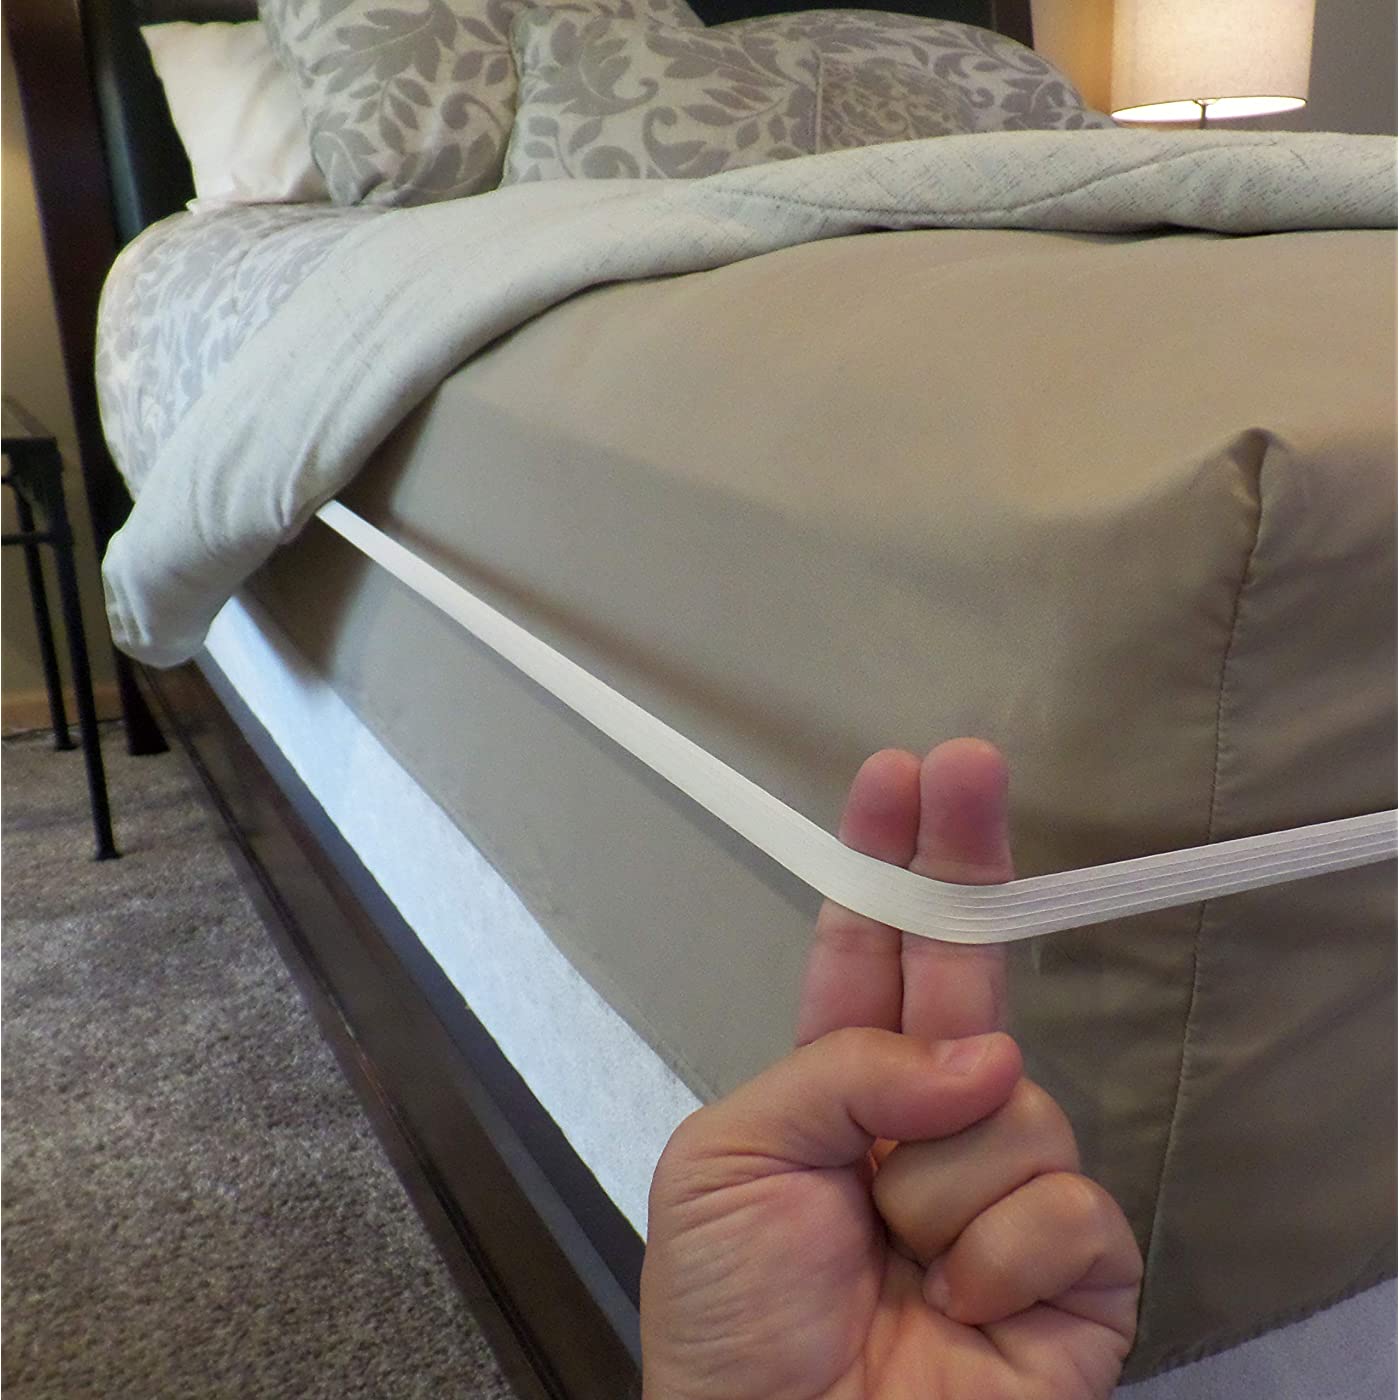 How To Keep Fitted Sheet On Mattress